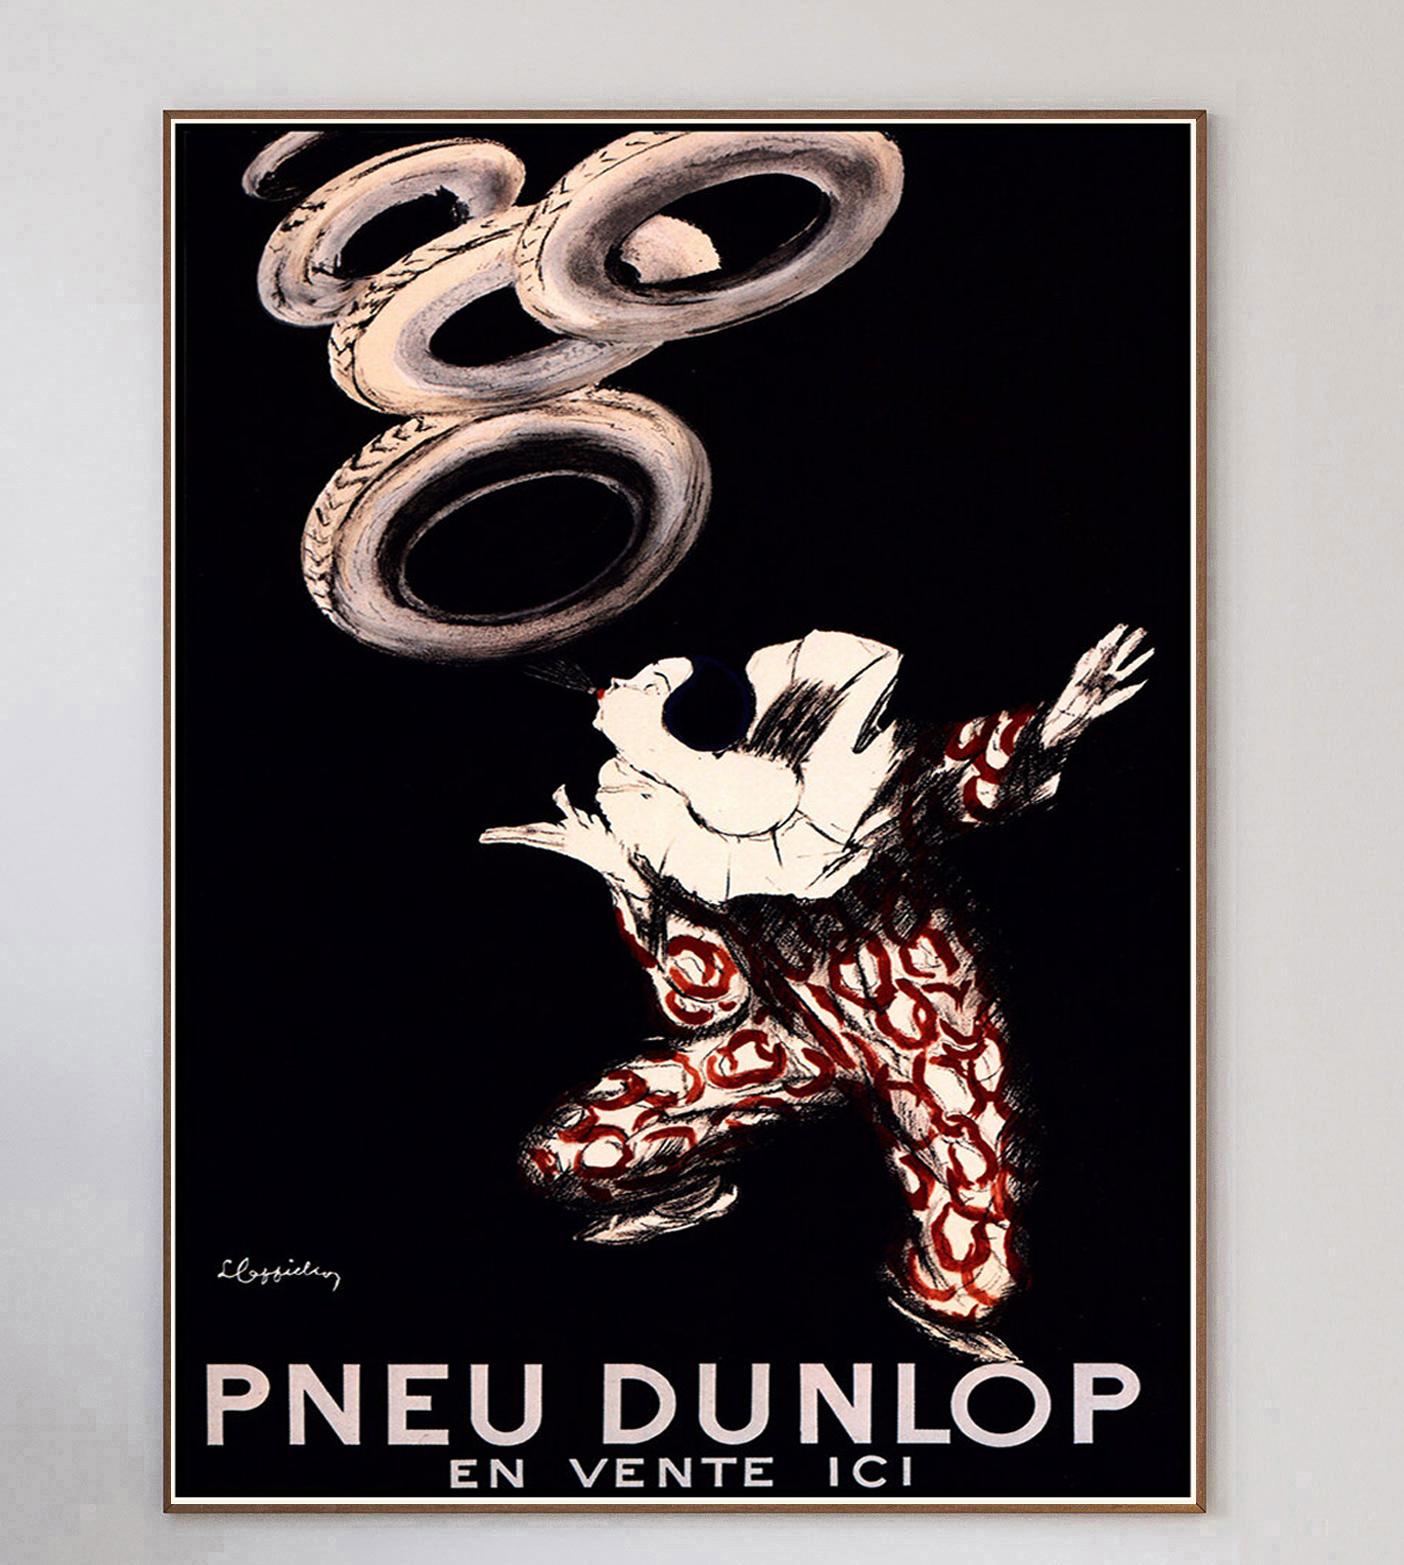 A wonderful poster and piece of advertising history. This poster created for Pneu Dunlop, or Dunlop Tyres was created in 1946 to promote the International tyre manufacturing brand. Founded in 1890 in Dublin, Dunlop Tyres continues to trade to this